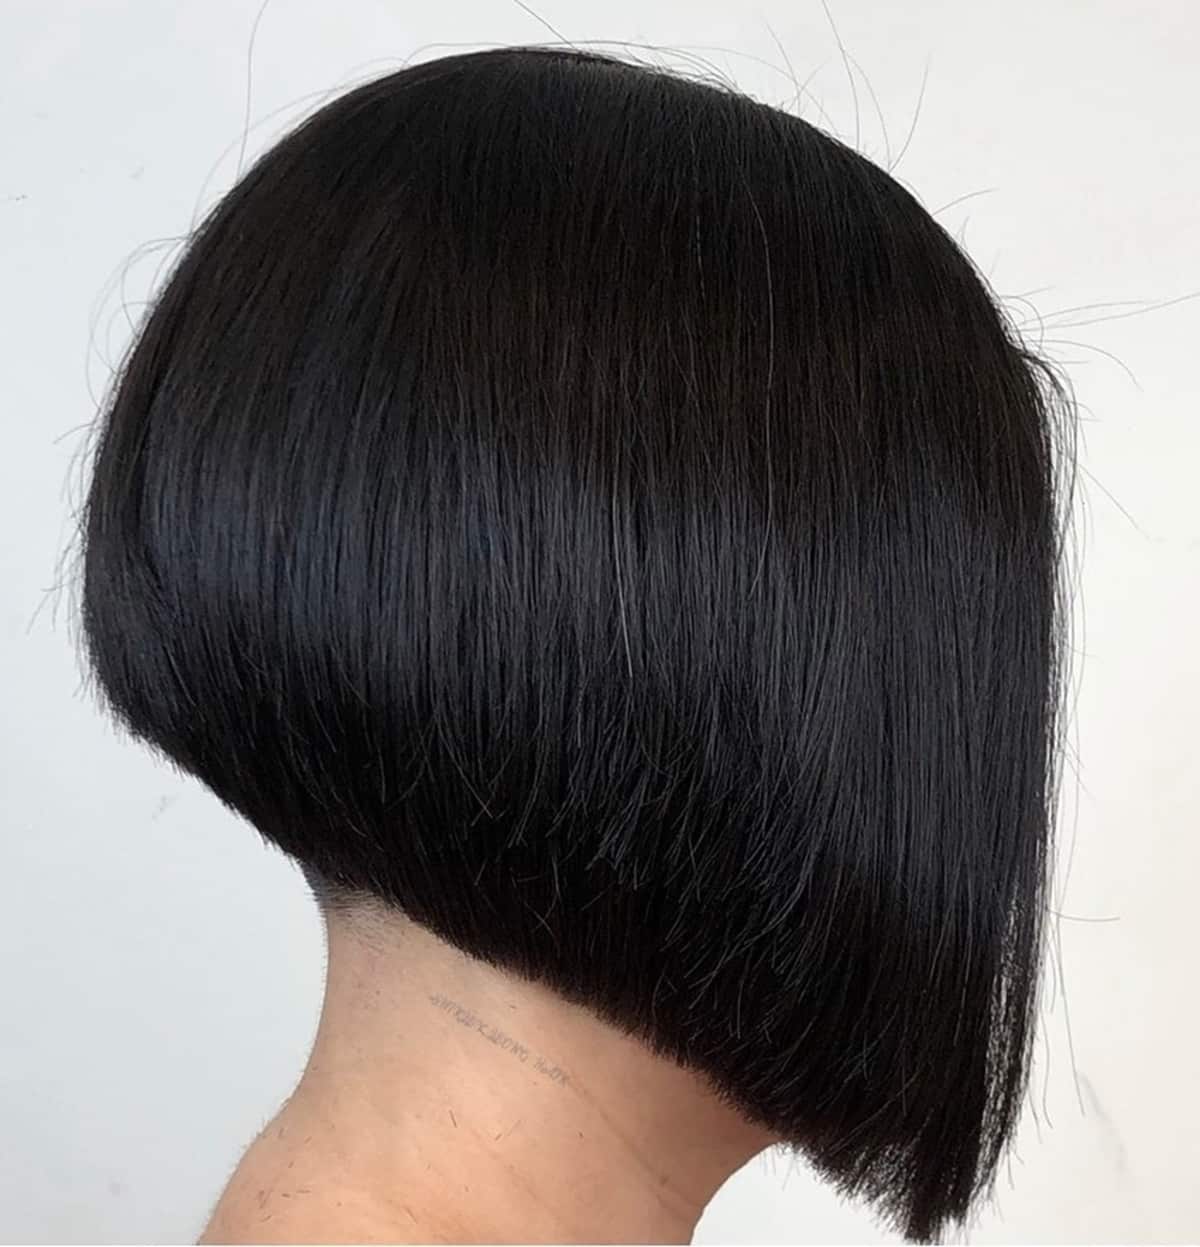 Graduated bob for thick hair